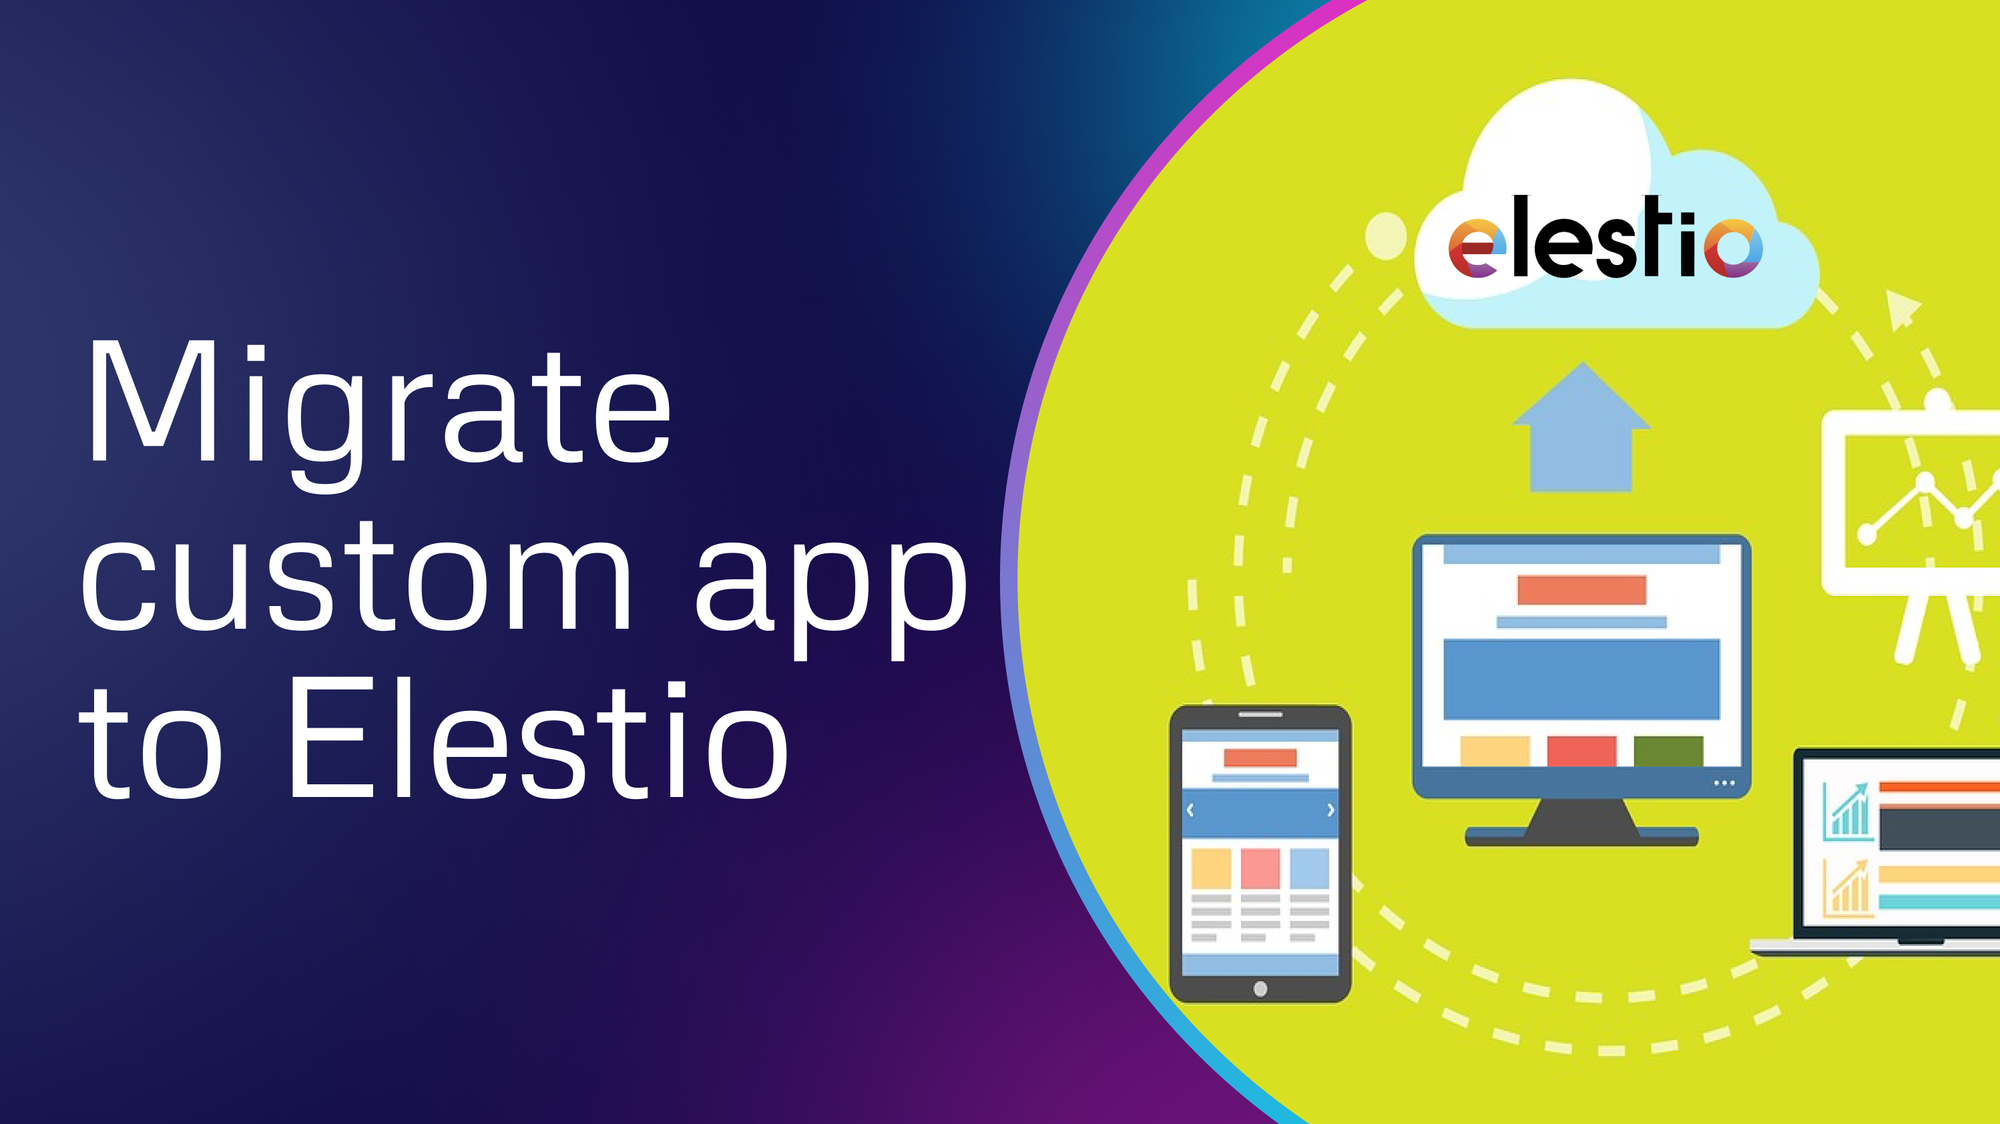 Migrate your customized application to Elestio